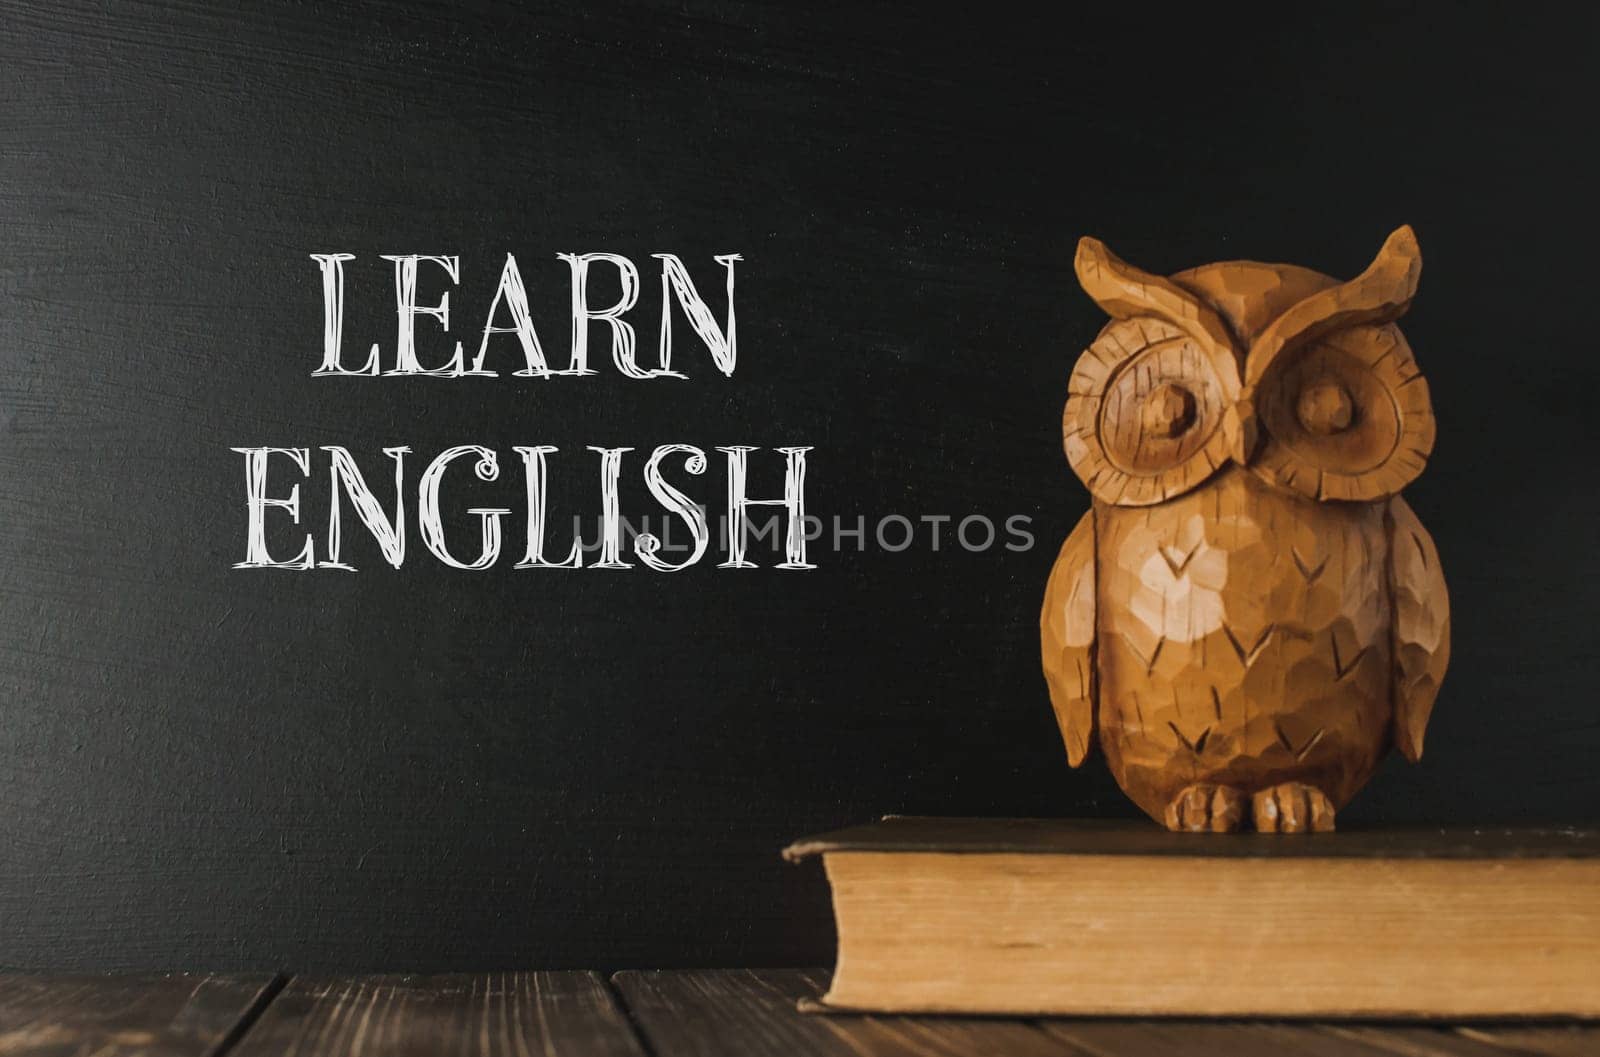 A wooden owl sits on a book next to a chalkboard that says Learn English. The owl is a symbol of wisdom and knowledge, and the chalkboard suggests that the owl is there to help people learn English